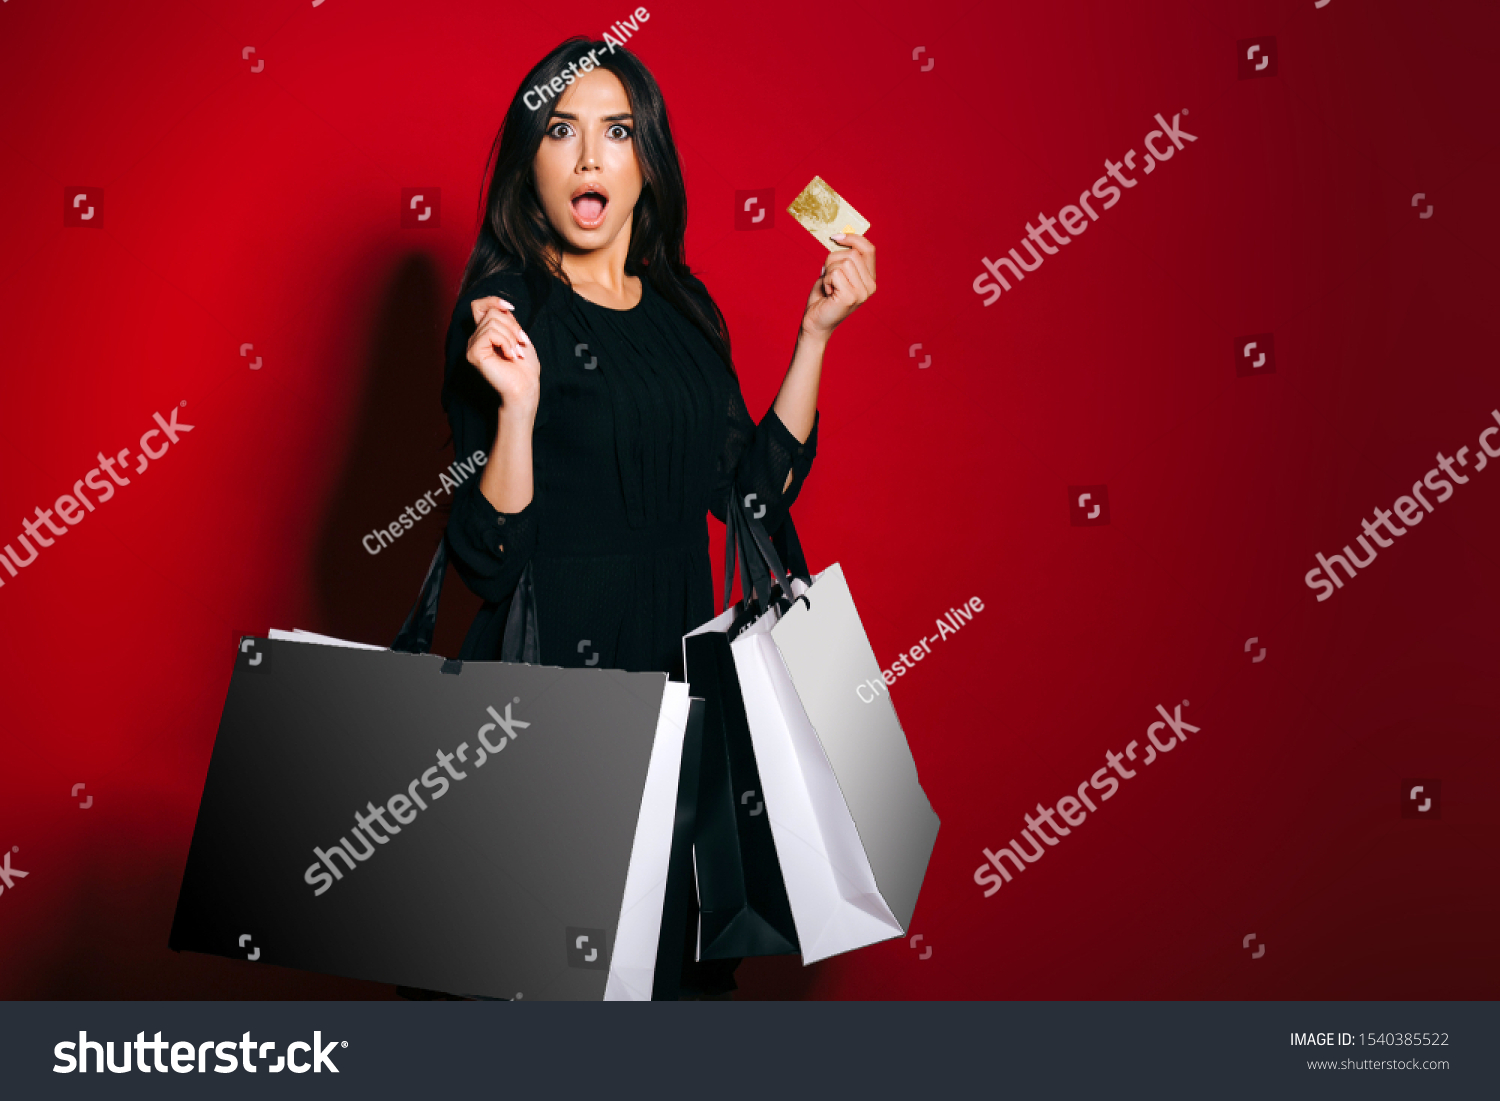 Surprised glamourous woman carrying shopping bags holding a gold credit card on dark red background. #1540385522